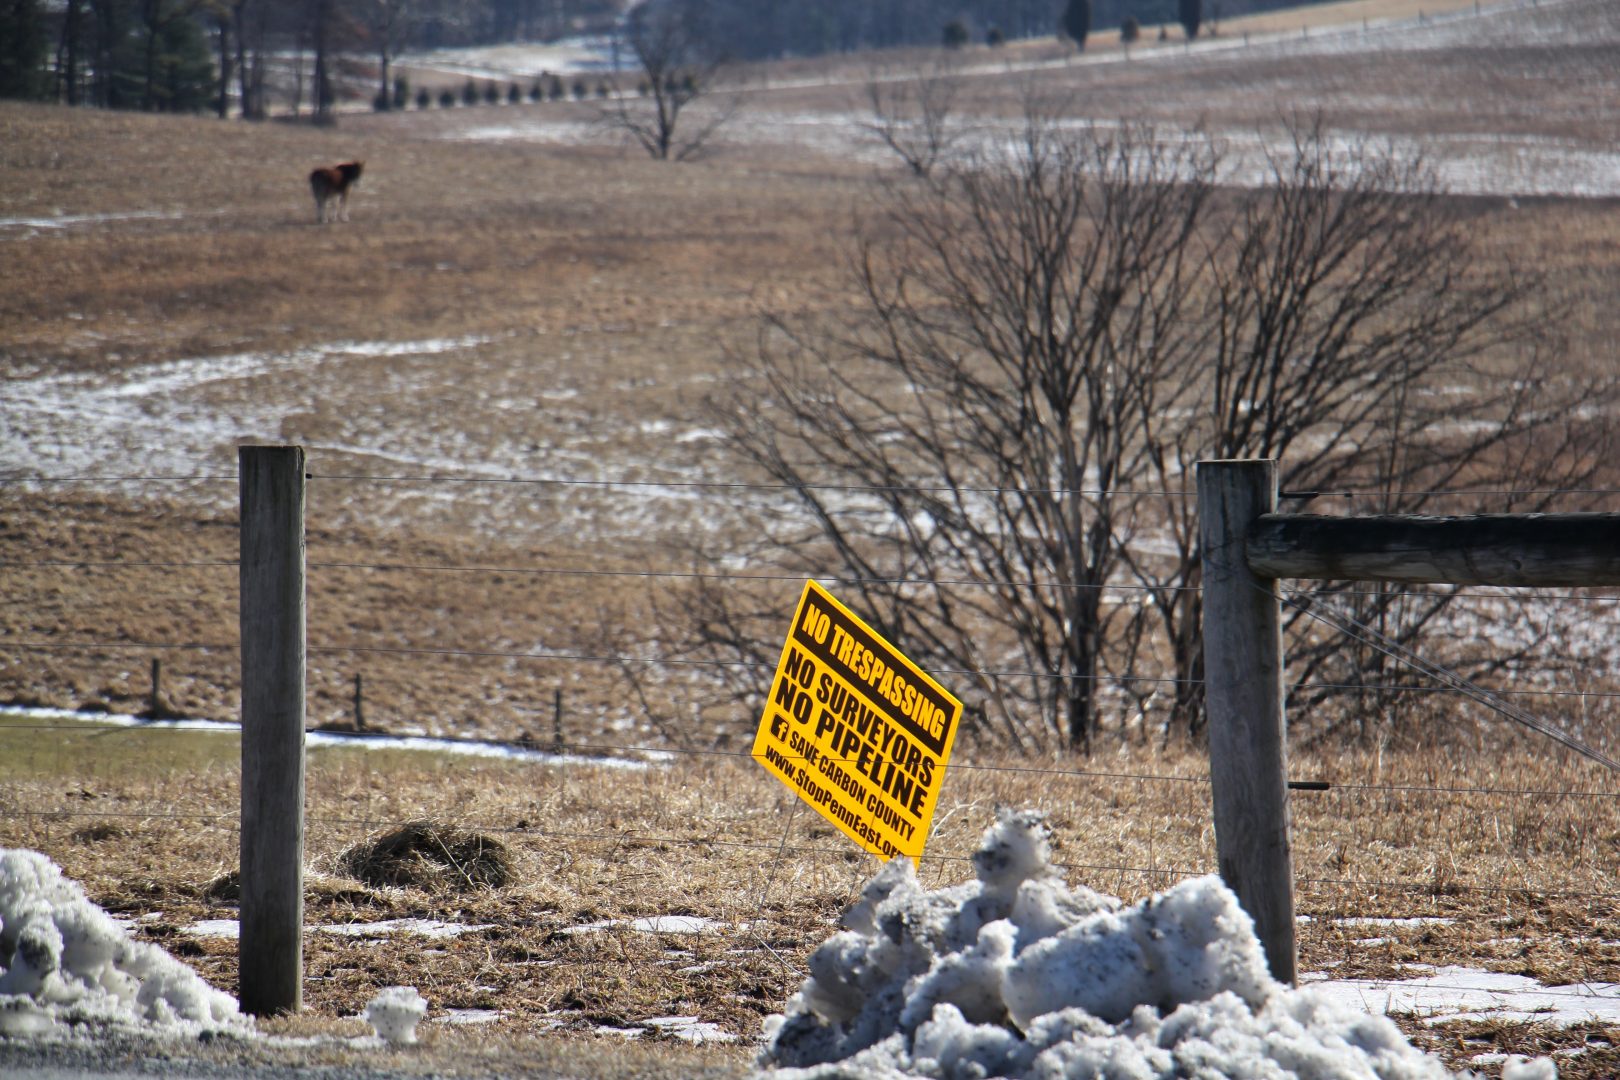 A sign on farmland in Palmerton shows local opposition to the PennEast pipleline. Some believe land under the Farmland Preservation program has been targeted for the route because of it's lower market value. (Emma Lee/WHYY)